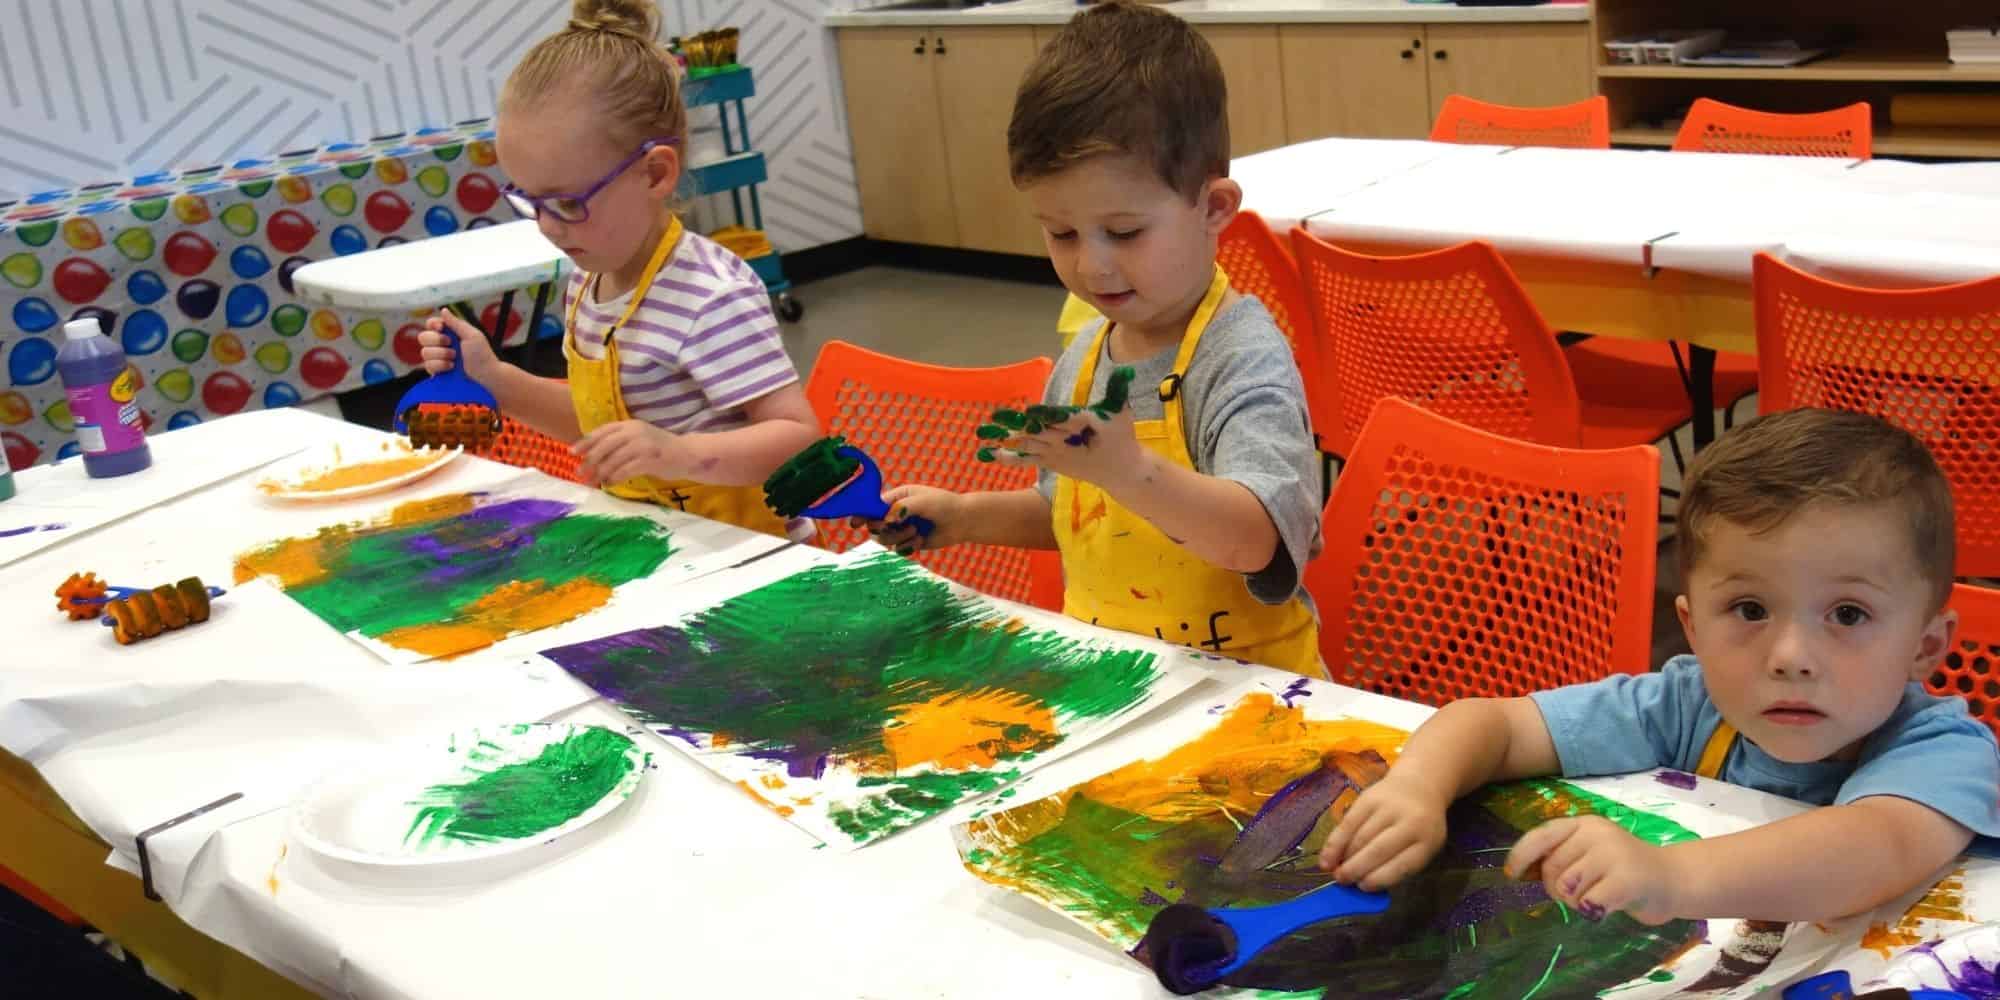 Kids and Adults build confidence with Art Pleasanton California